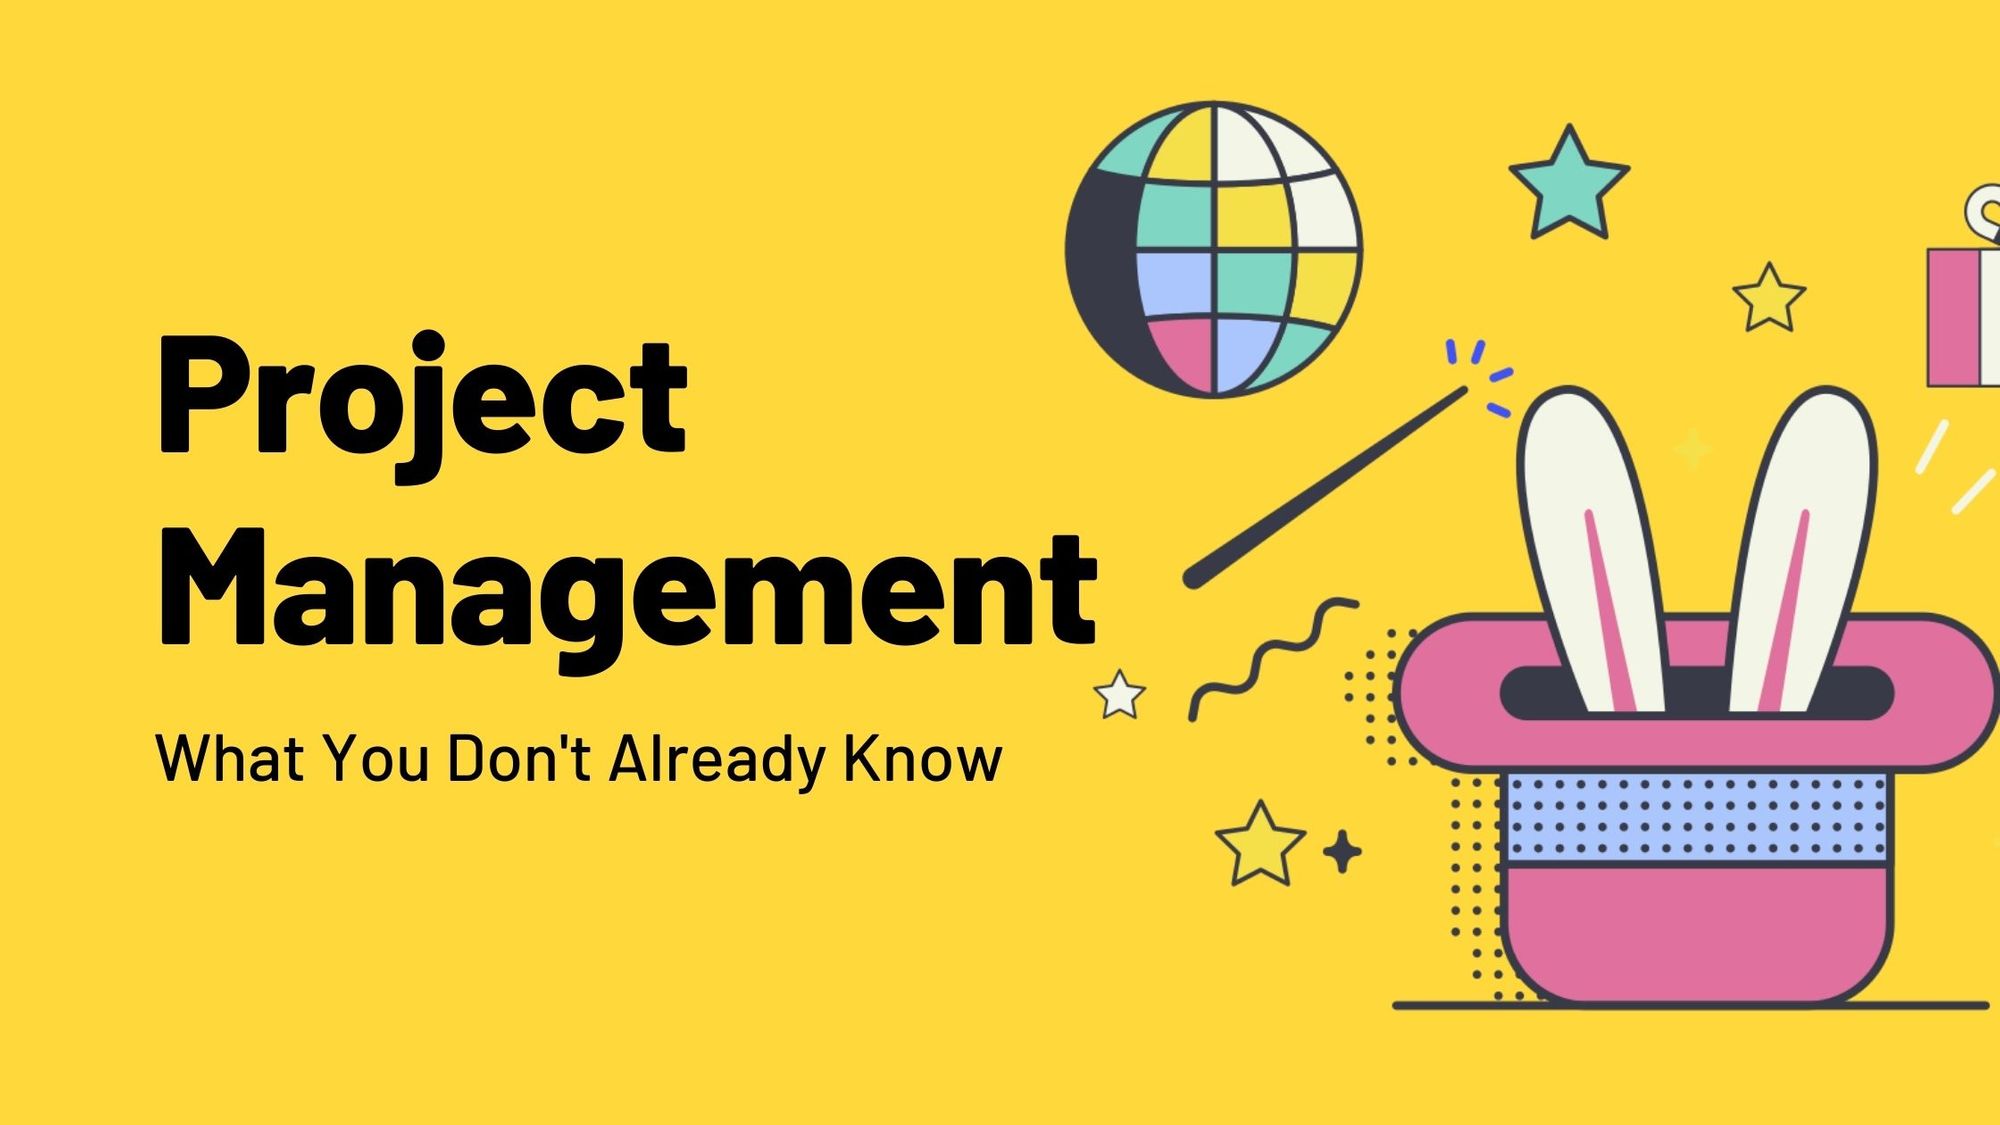 Critical Project Management Skills You Don't Already Know